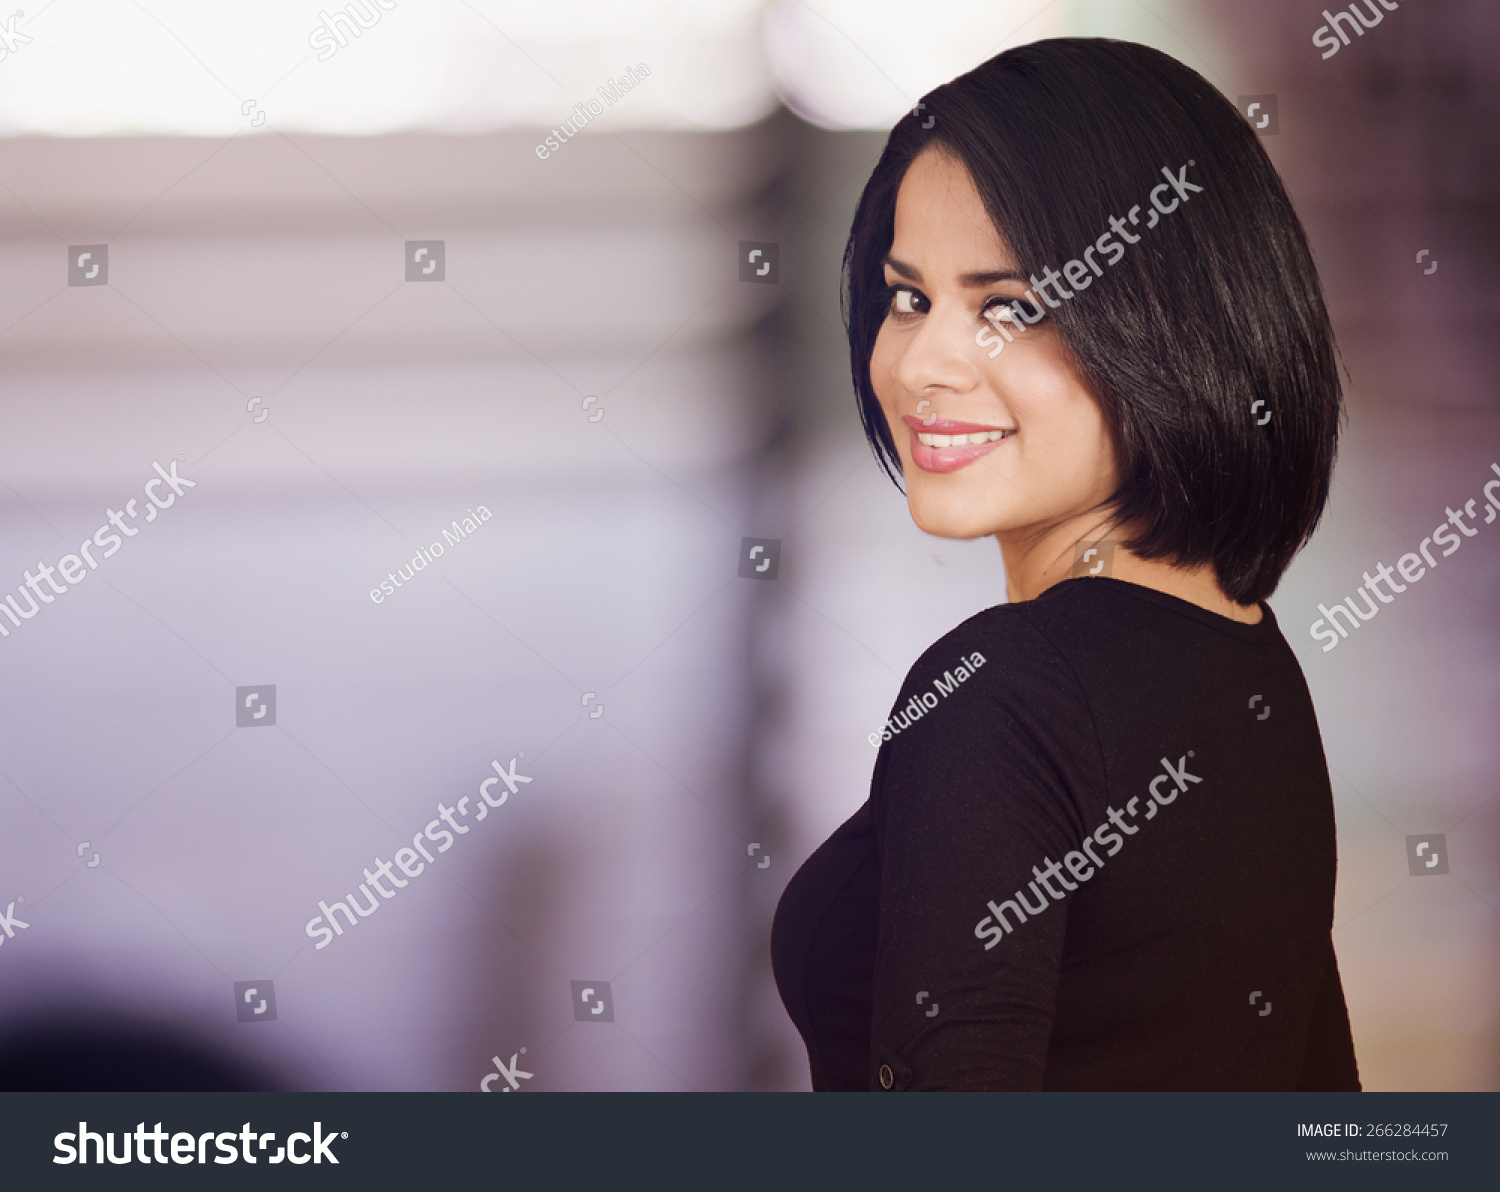 http://image.shutterstock.com/z/stock-photo-beautiful-latin-woman-looking-back-and-smiling-266284457.jpg